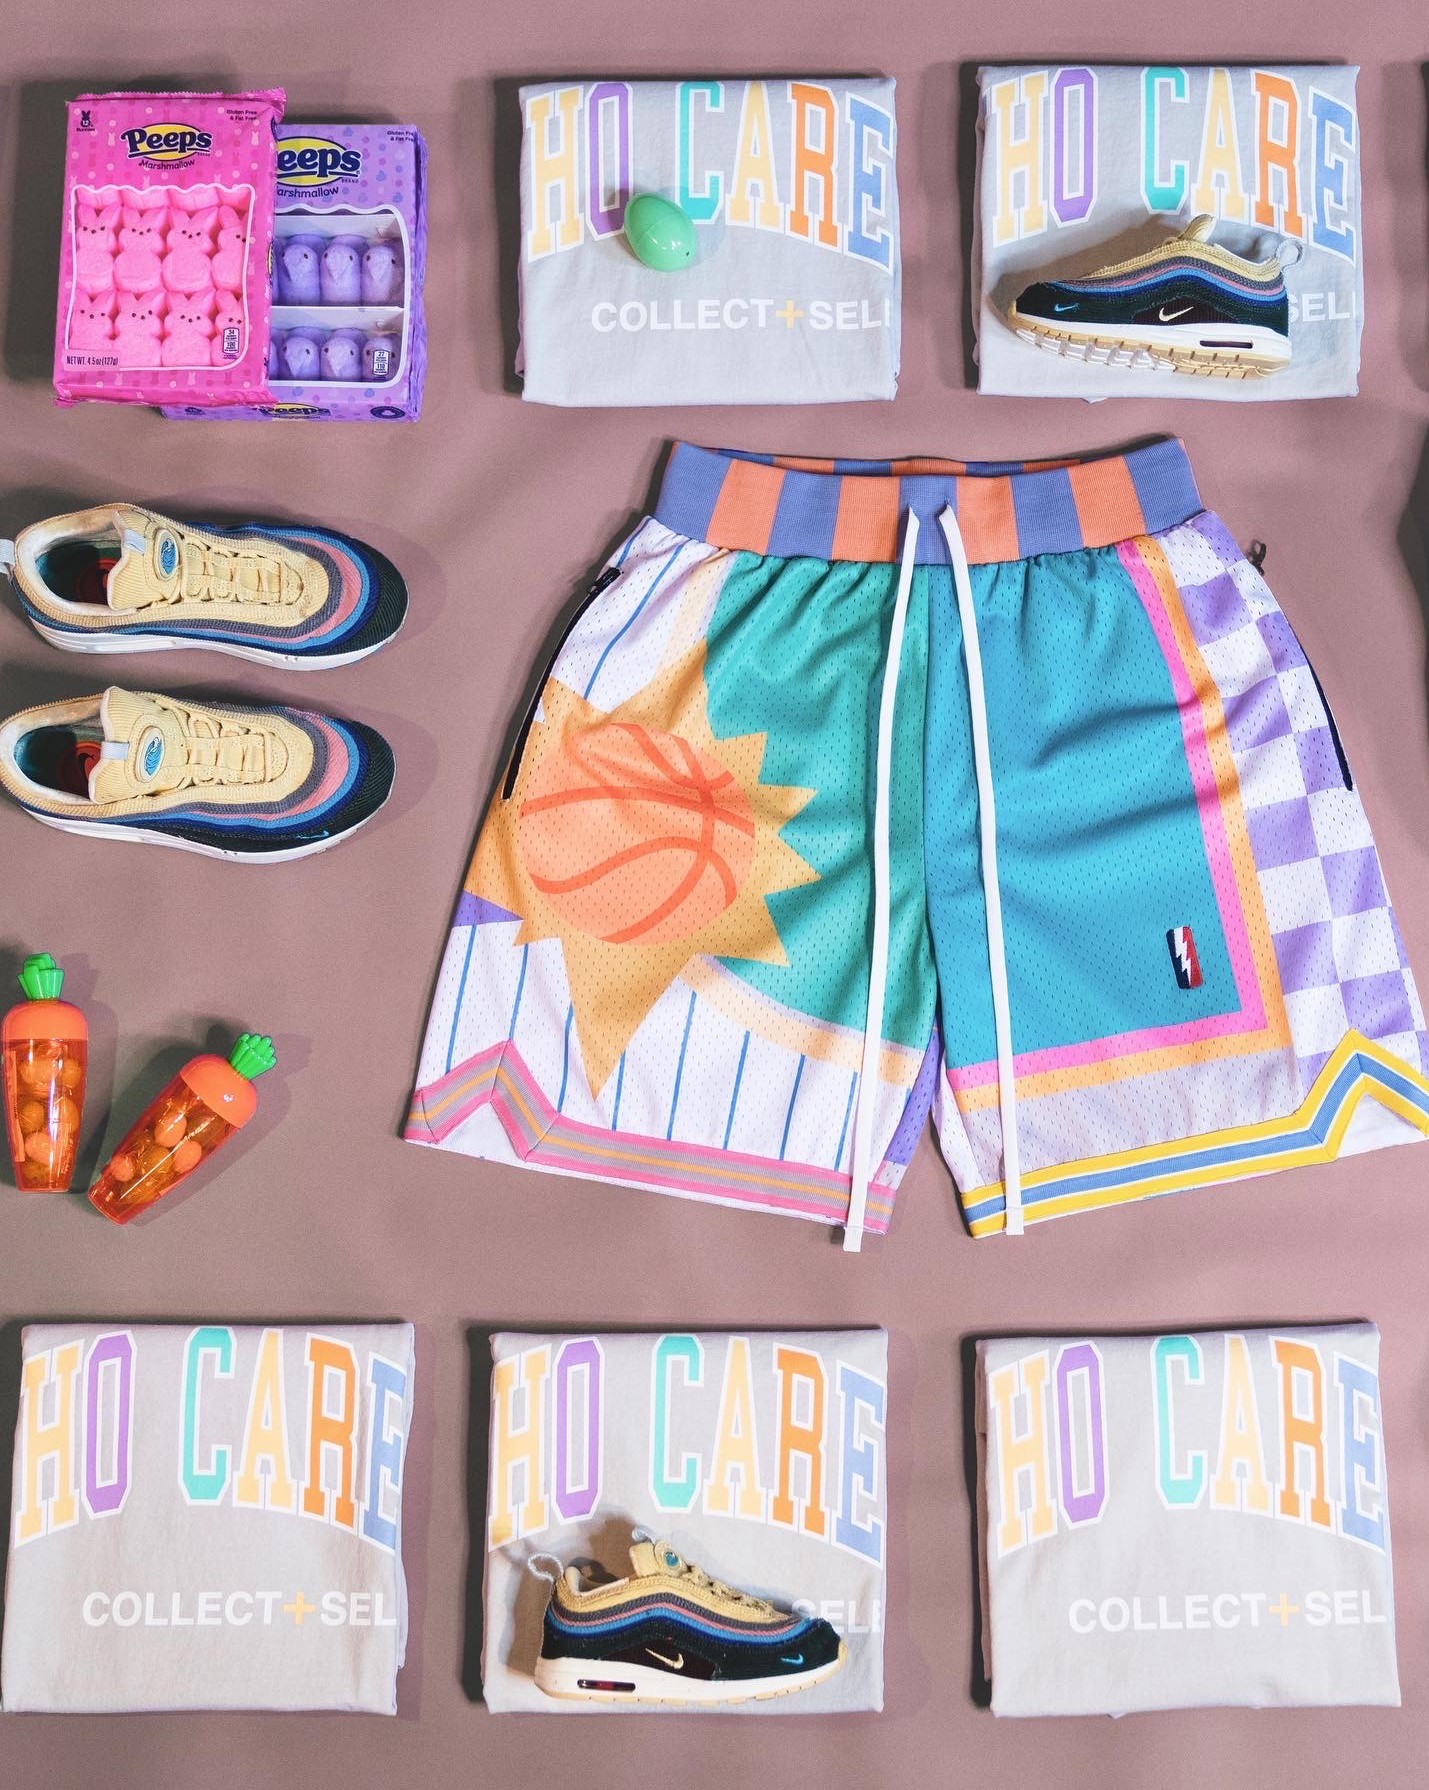 Who Cares x Collect &amp; Select &#x27;What The&#x27; Part 2 Shorts